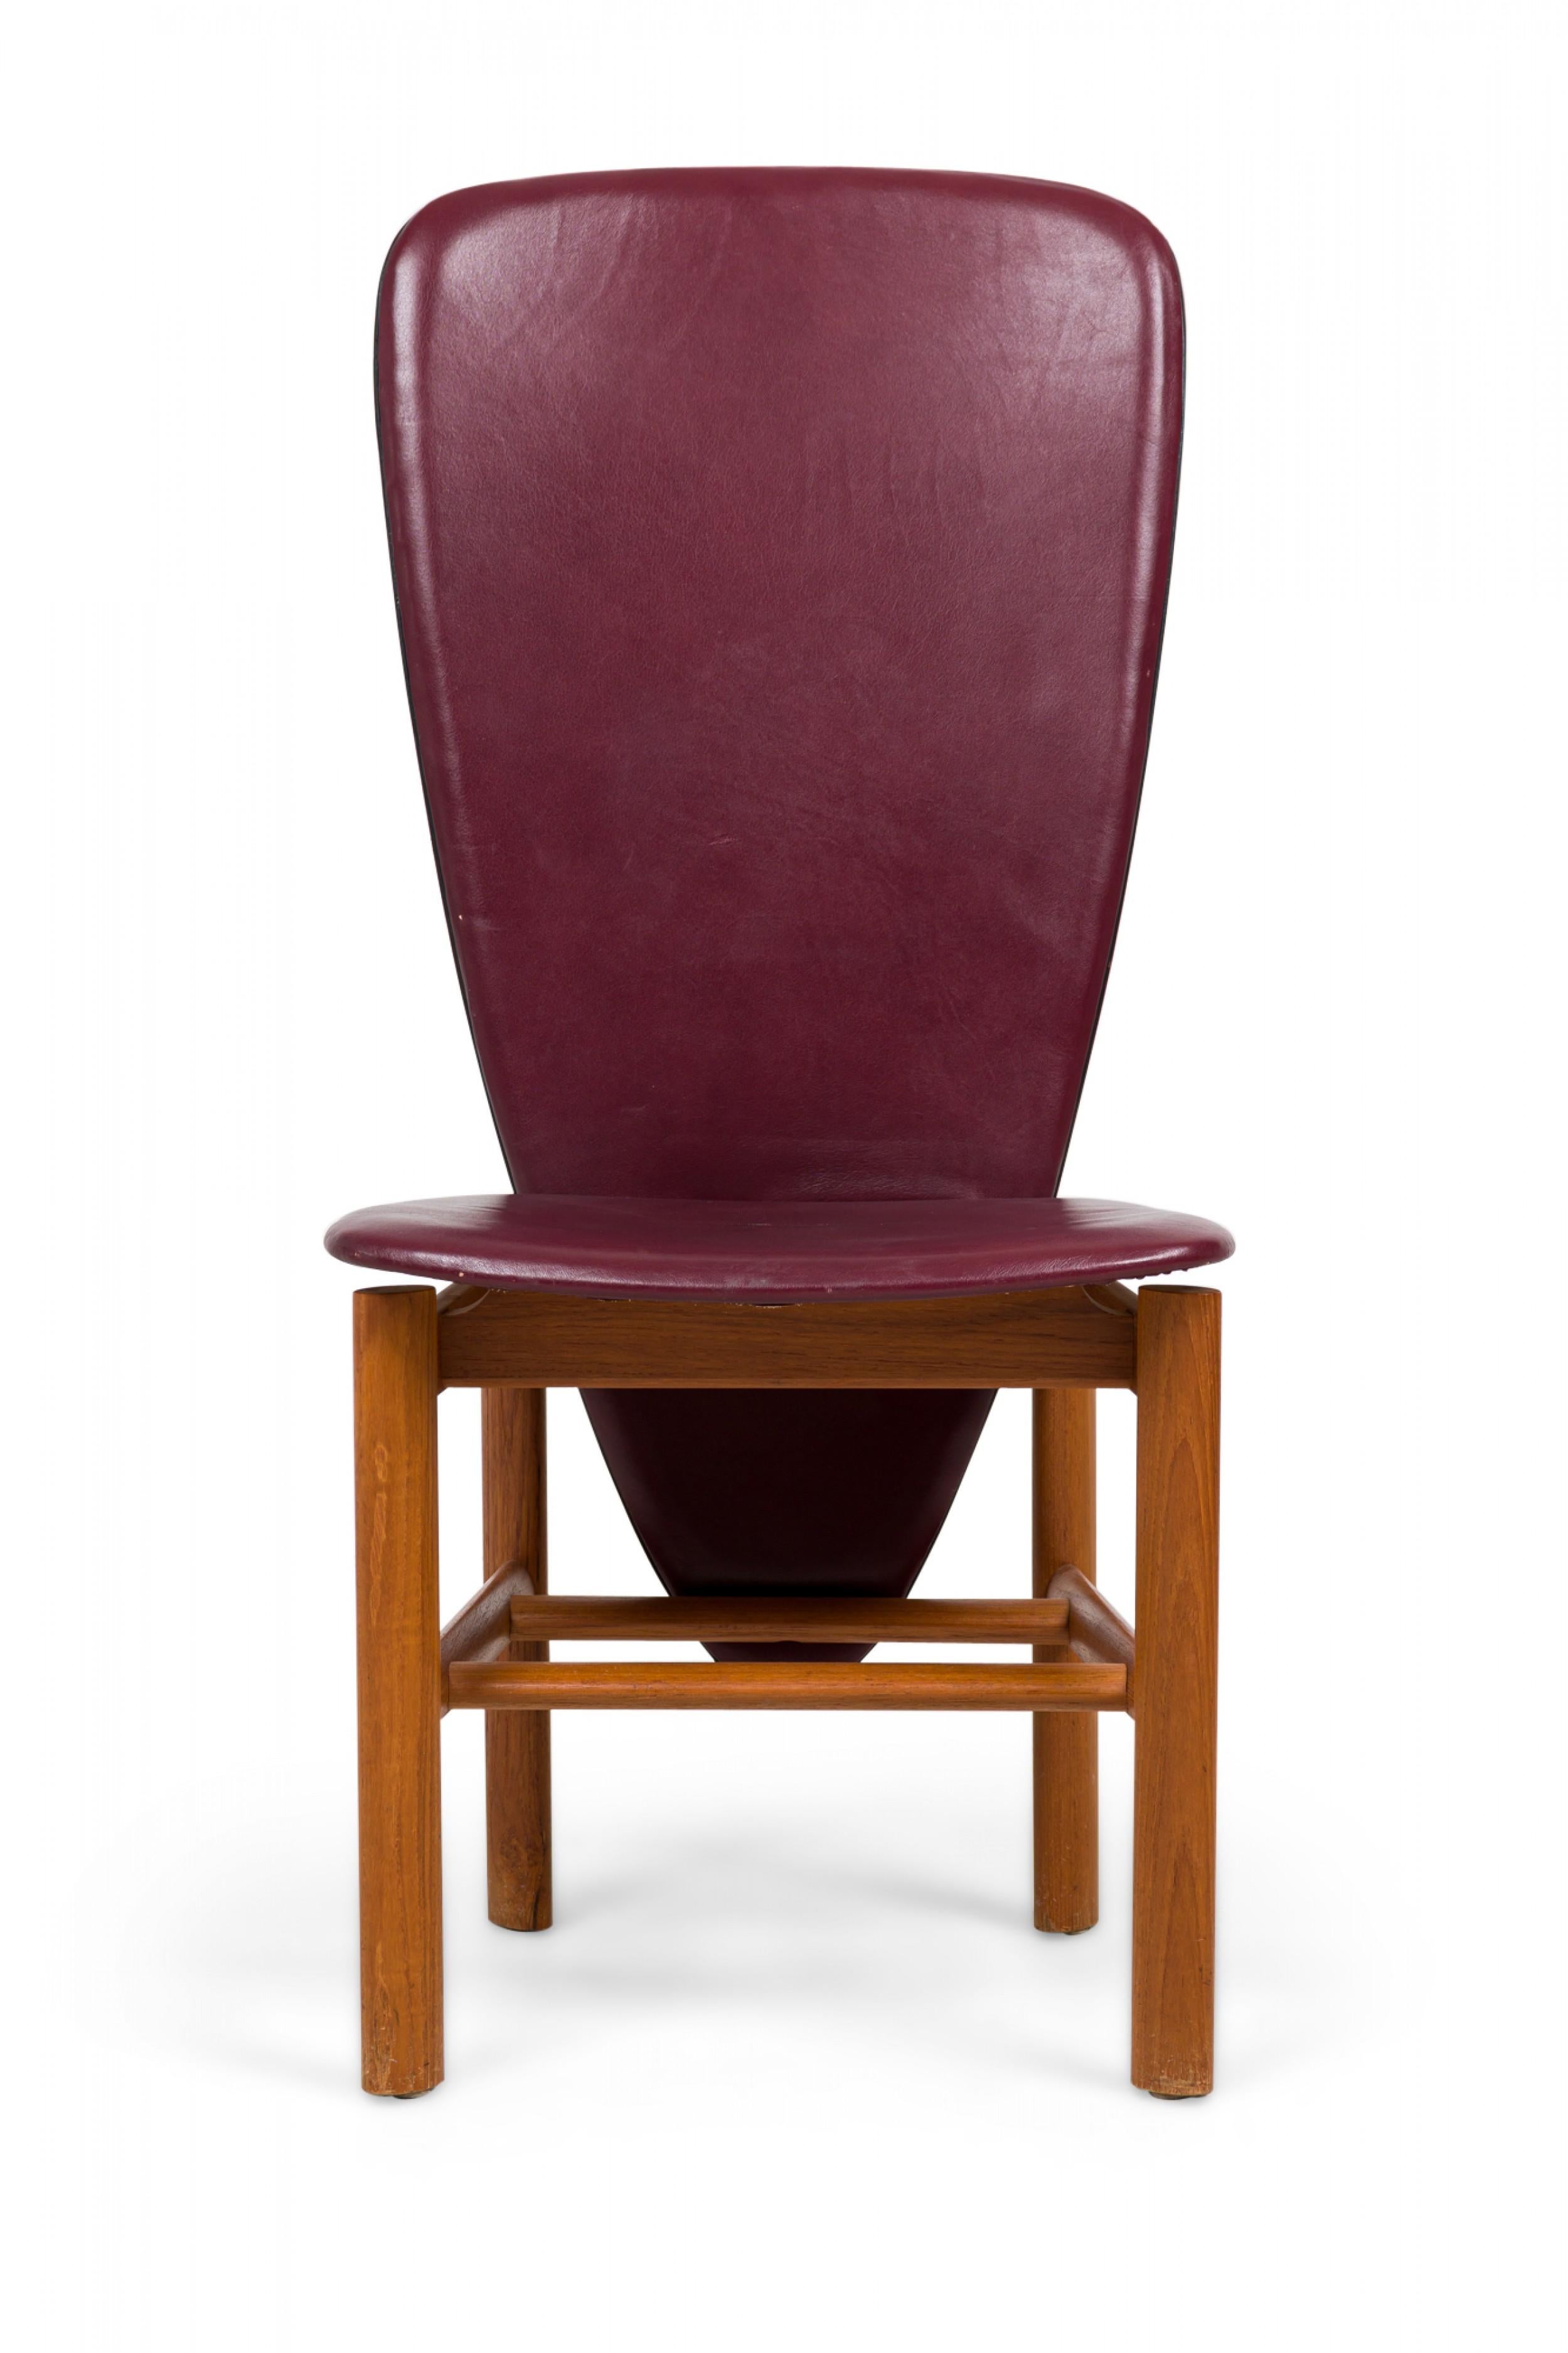 SET of 8 Mid-Century Danish Modern (1960) high back teak dining / side chairs with a tubular square form frames, elongated triangular backs with rounded corners upholstered in burgundy leather. (SKOVBY MØBELFABRIK) (PRICED AS SET).